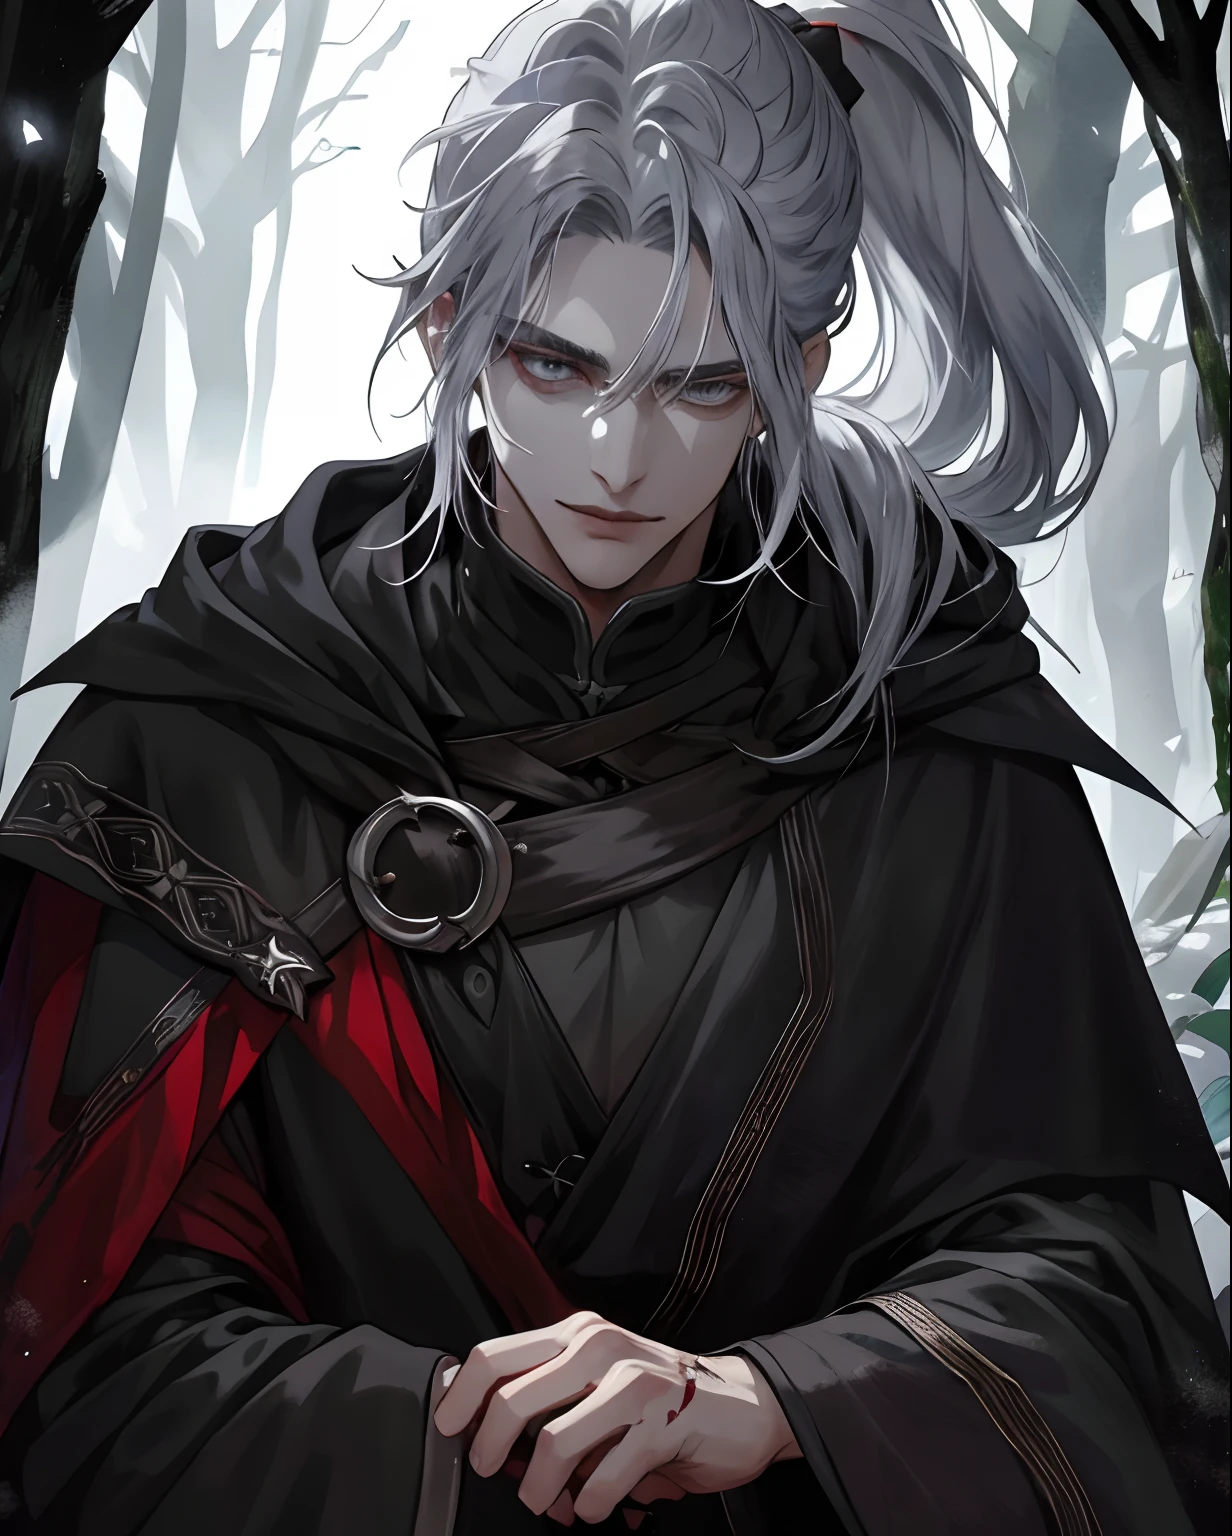 1male, beautiful, silver hair with low ponytail, dark grey eyes, detailed eyes, black cloak, dark sorcerer, rogue mage, alone in a dark forest, depressed, medieval fantasy, blood magic, condescending